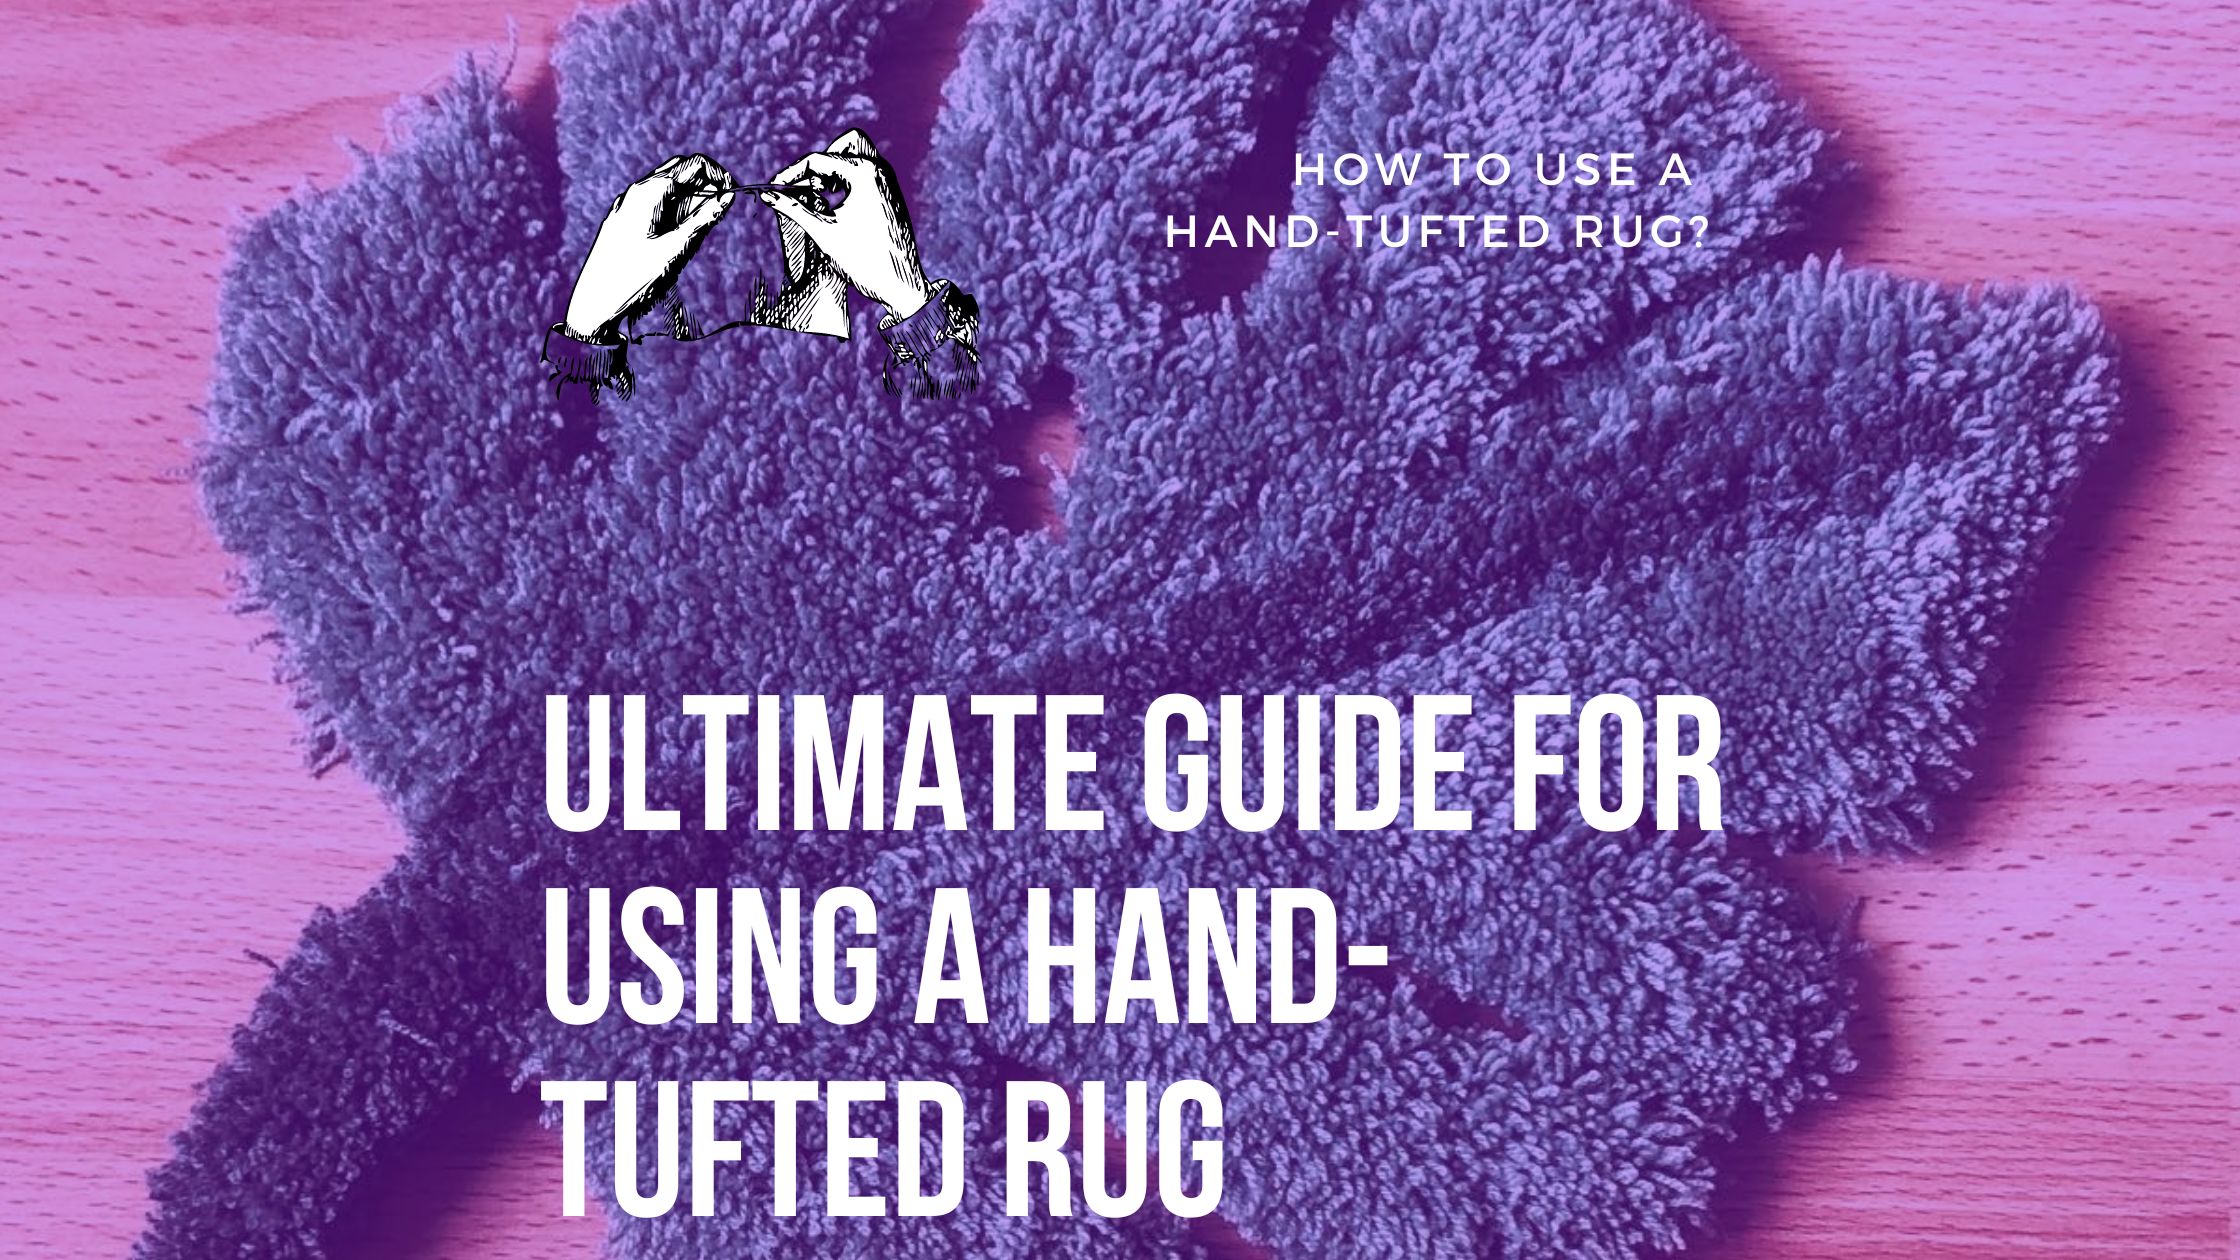 Ultimate Guide For Using A Hand-Tufted Rug